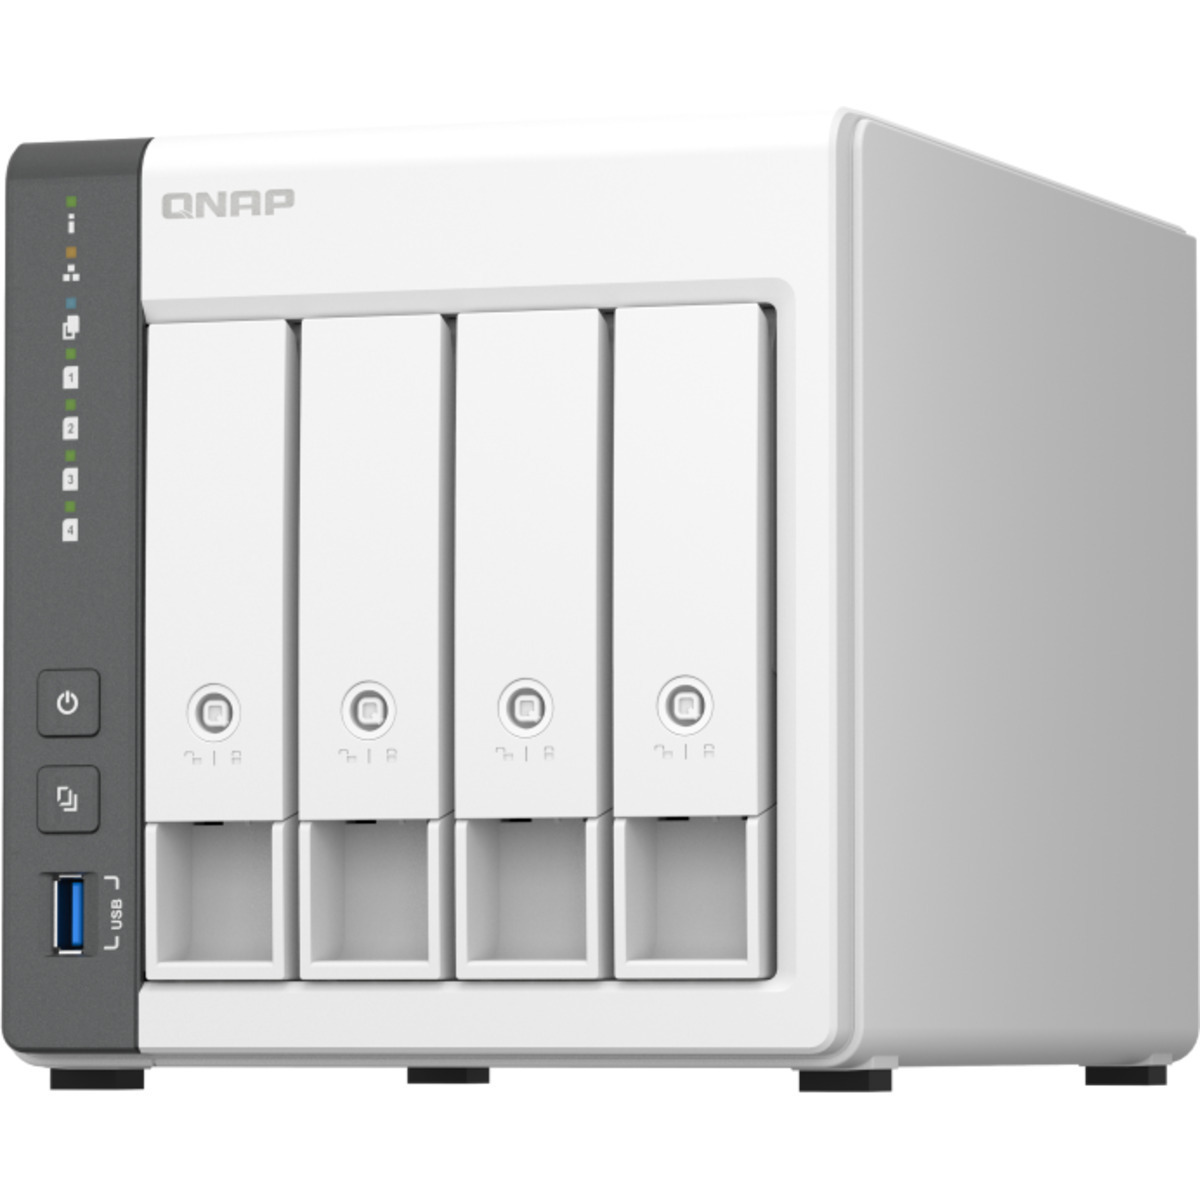 QNAP TS-433 40tb 4-Bay Desktop Personal / Basic Home / Small Office NAS - Network Attached Storage Device 4x10tb Western Digital Red Pro WD102KFBX 3.5 7200rpm SATA 6Gb/s HDD NAS Class Drives Installed - Burn-In Tested TS-433